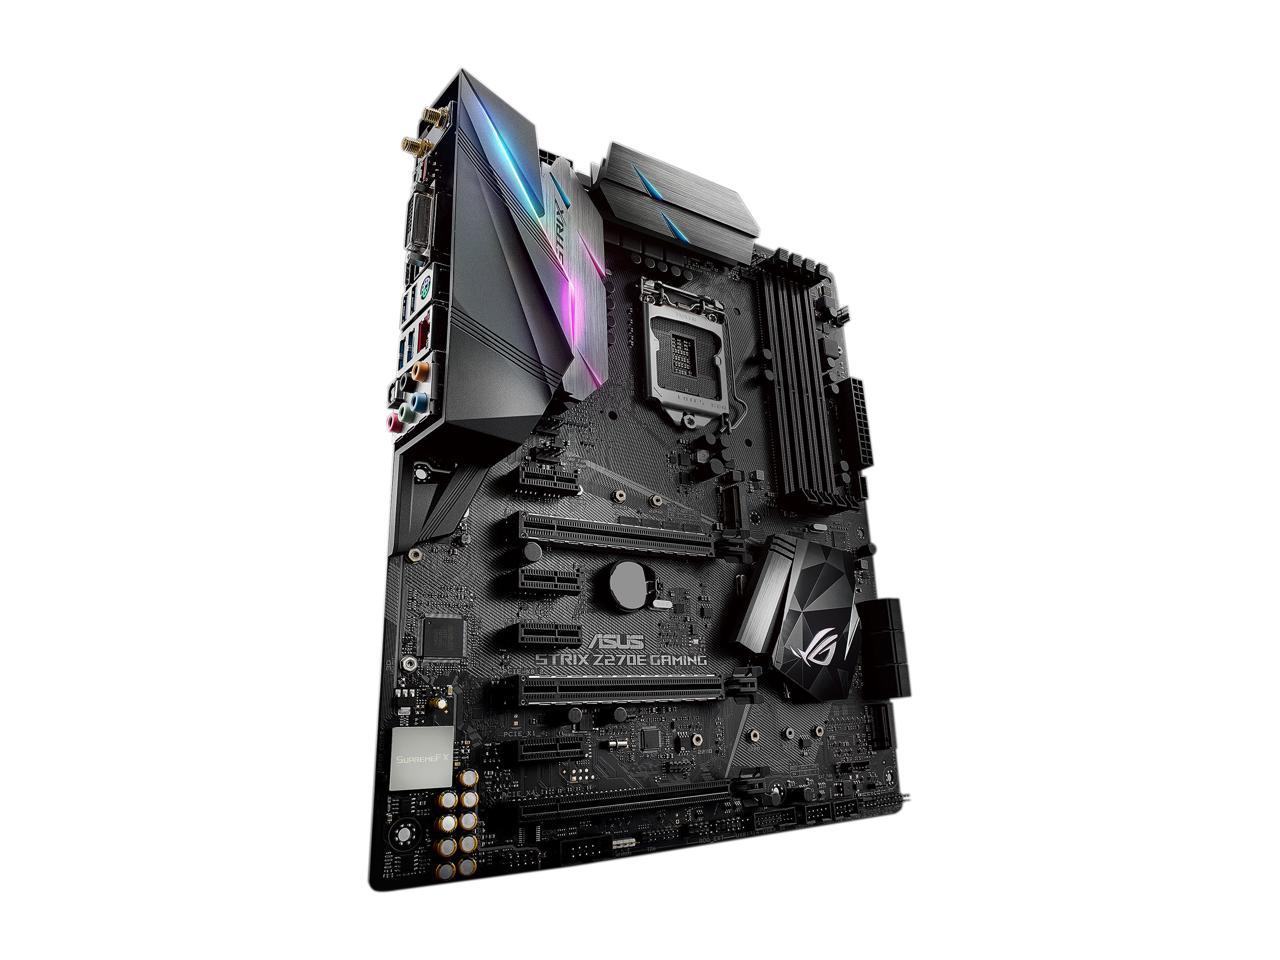 ASUS ROG STRIX Z270E GAMING LGA1151 DDR4 DP HDMI DVI M.2 ATX Motherboard with Onboard AC Wi-Fi and USB 3.1